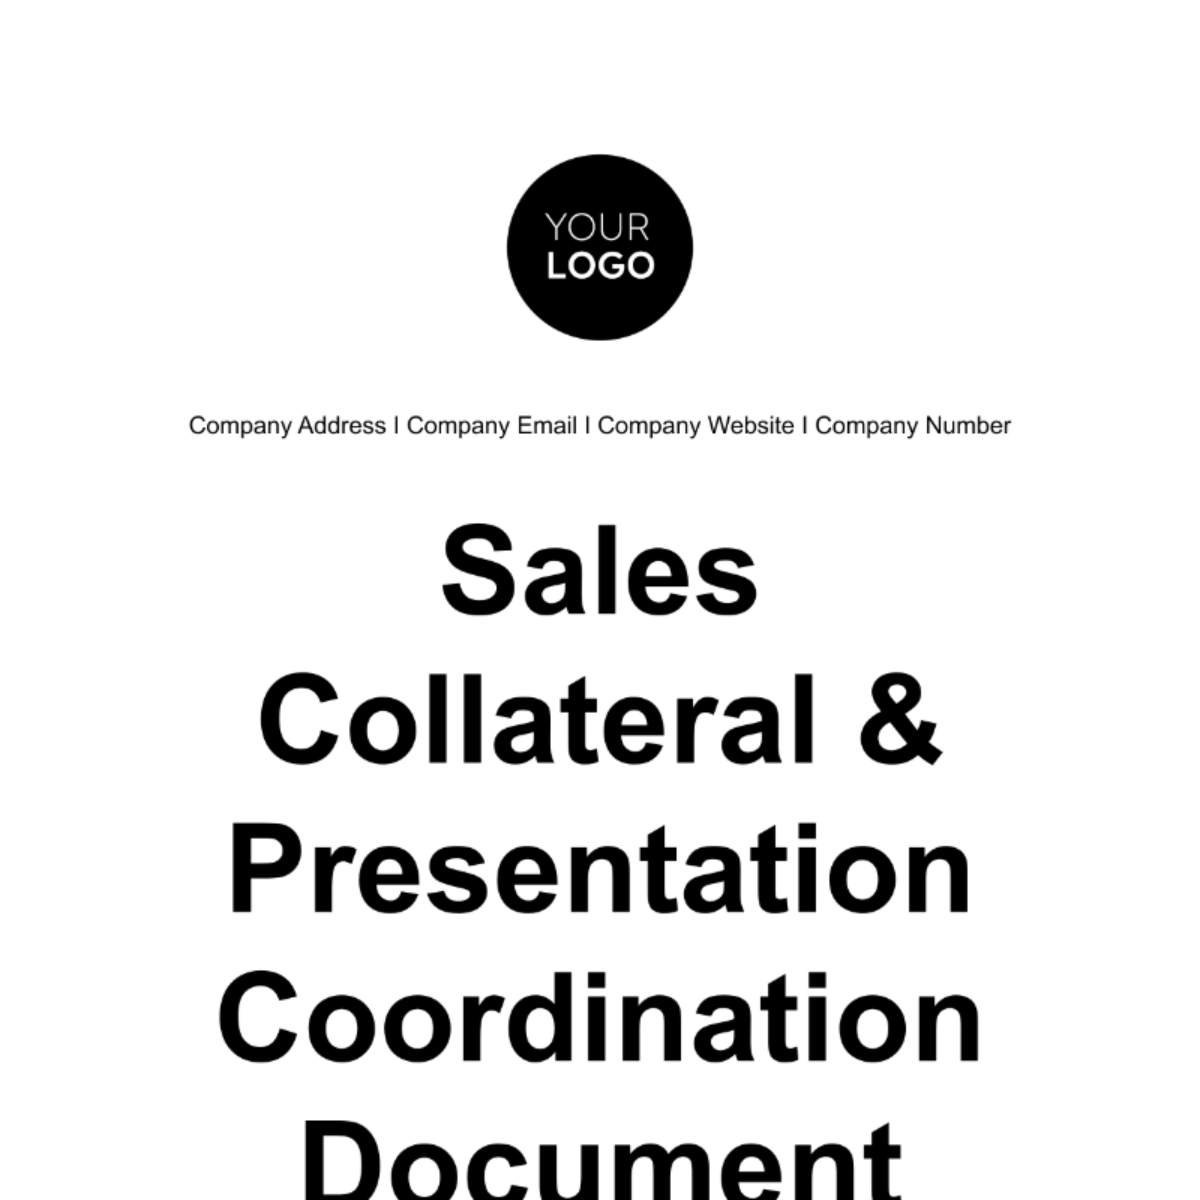 Free Sales Collateral & Presentation Coordination Document Template